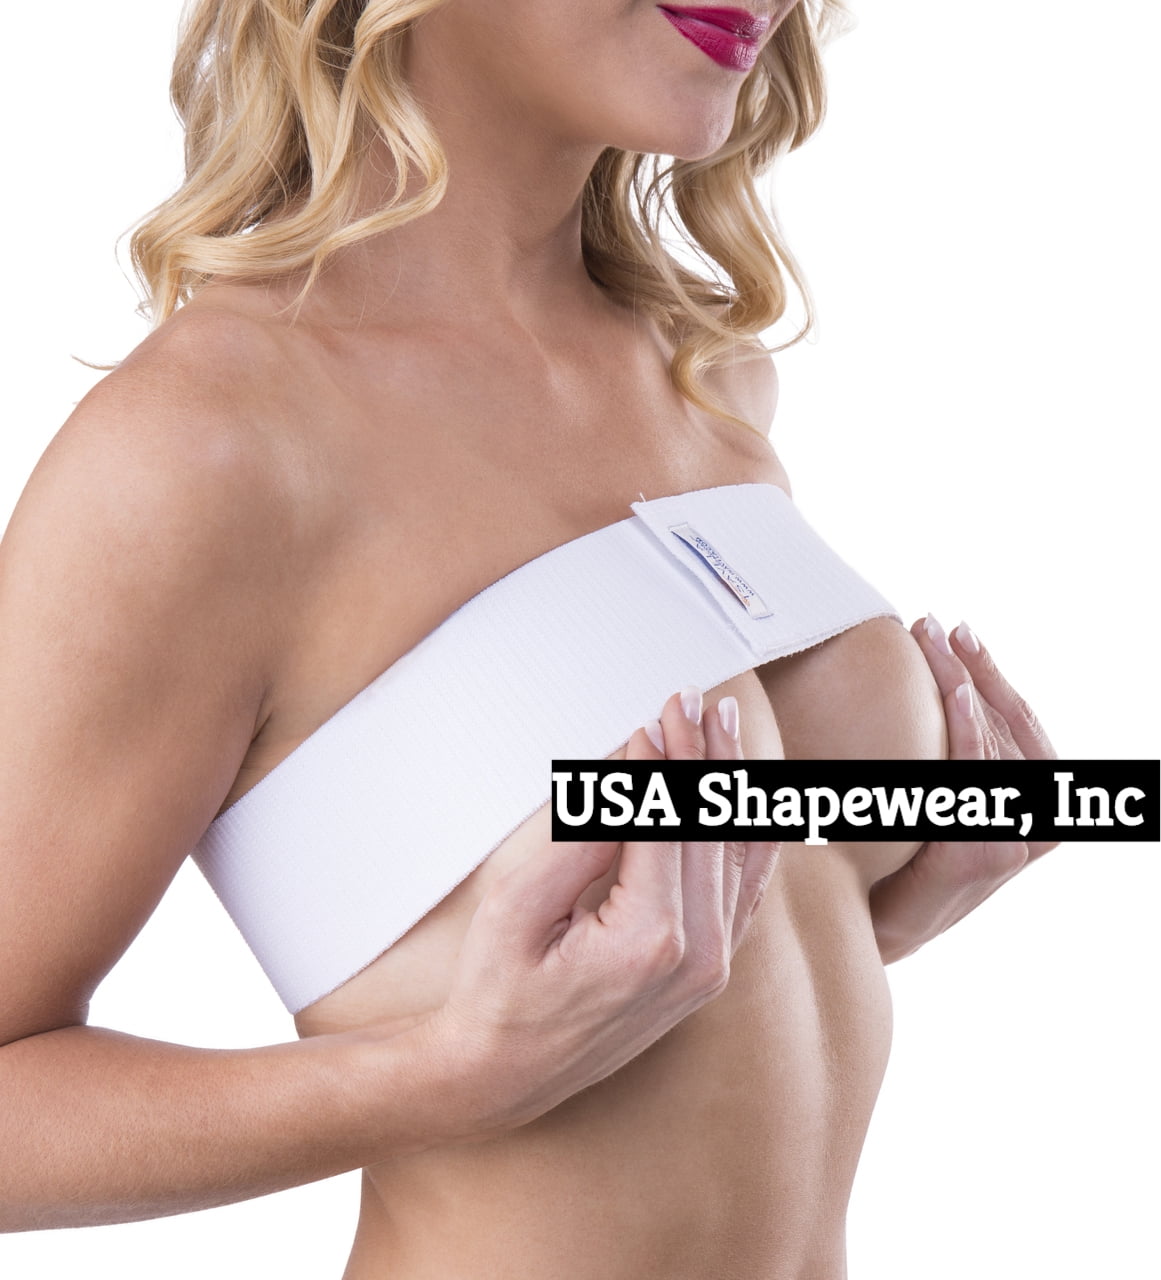  invera Breast Implant Stabilizer Band, Post Surgery